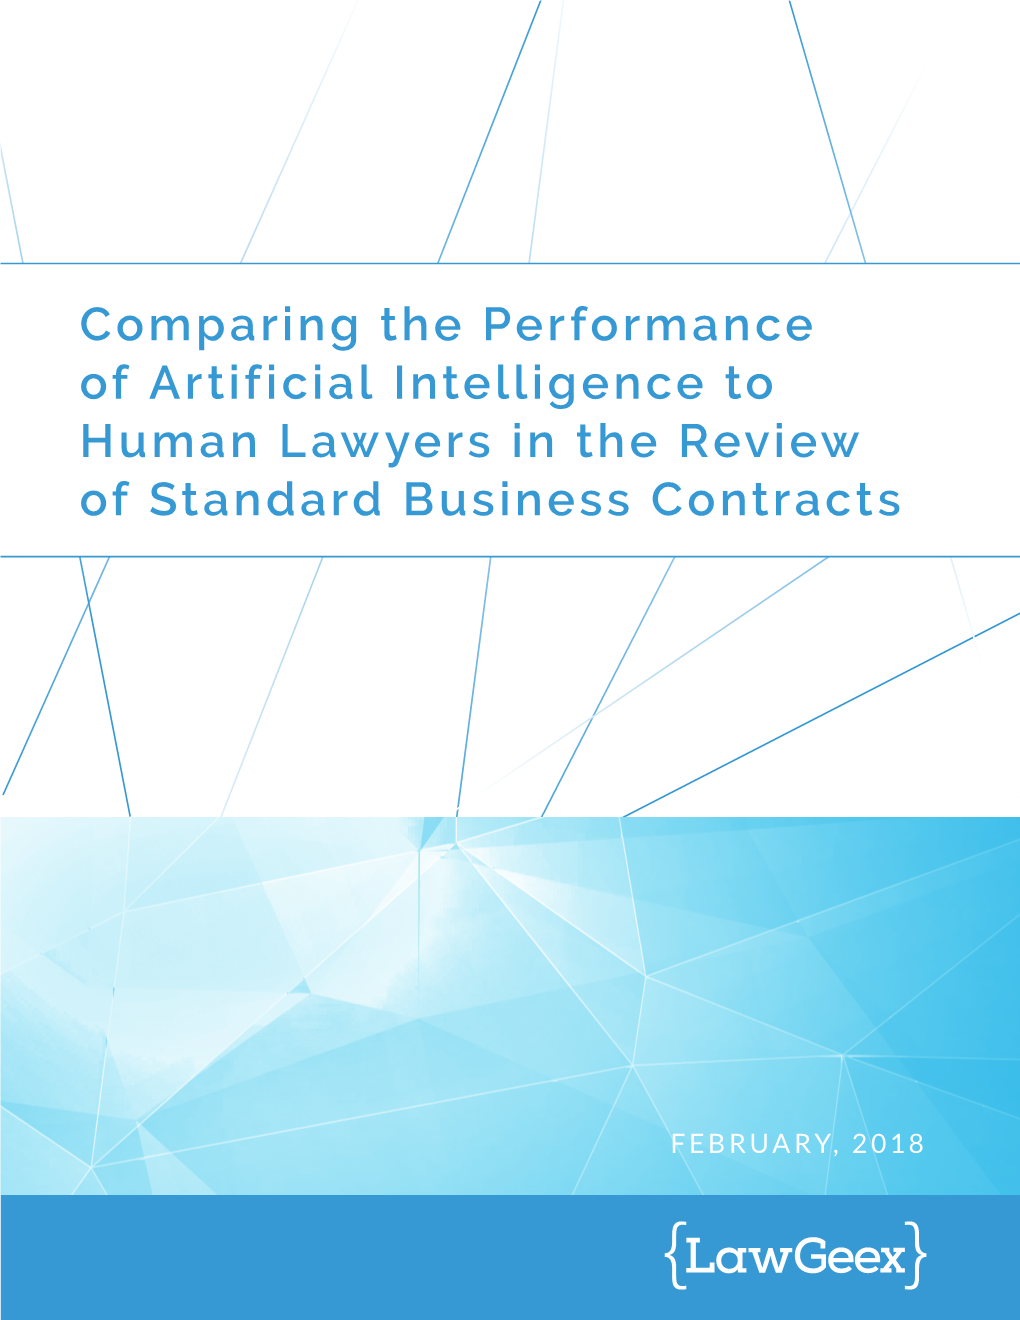 Comparing the Performance of Artificial Intelligence to Human Lawyers in the Review of Standard Business Contracts